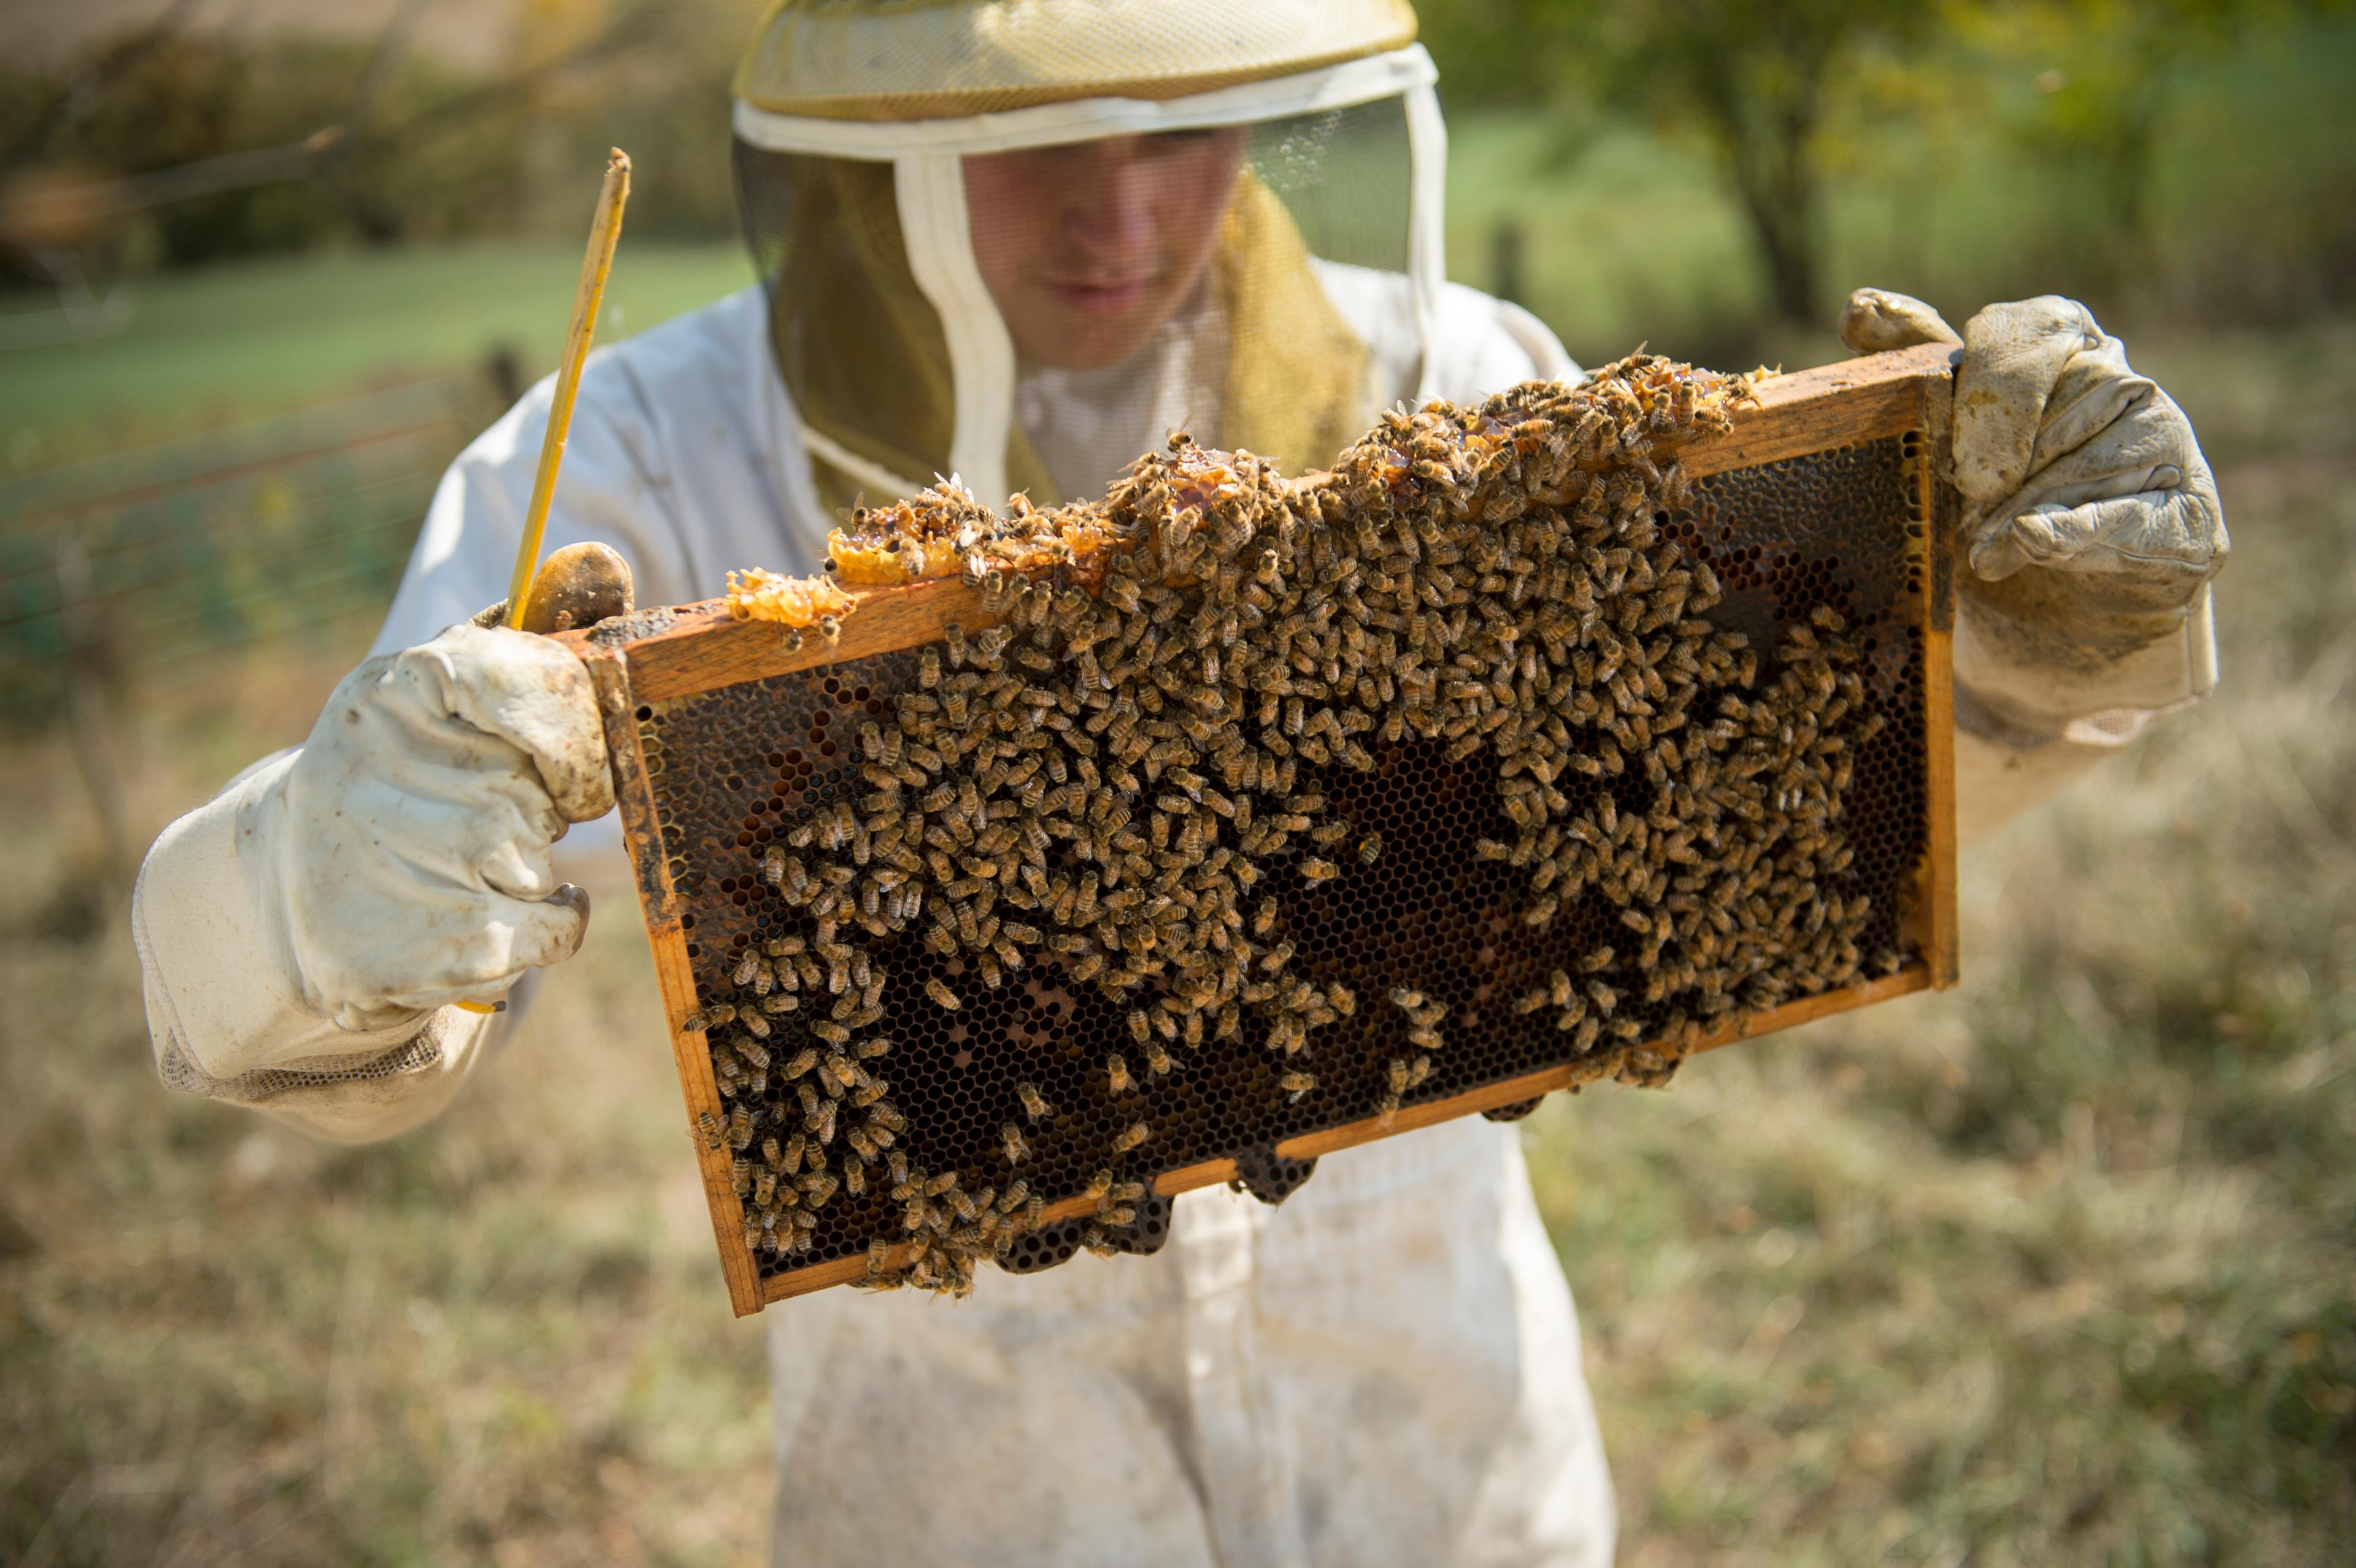 Nathan Koester cares for bees at the family’s organic farm in Illinois.